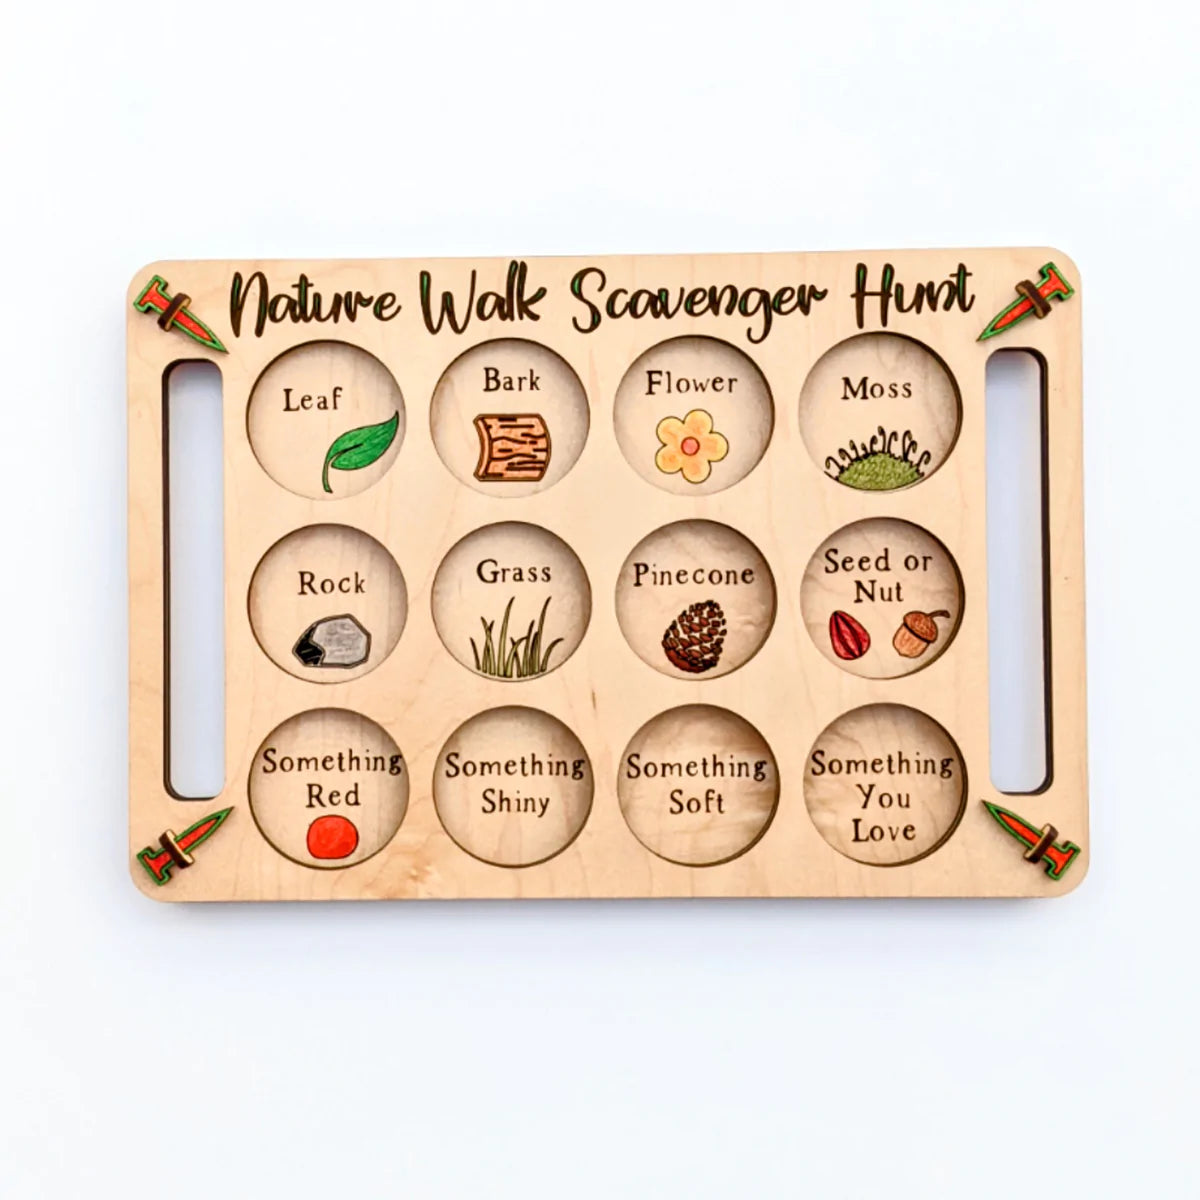 Nature Walk Scavenger Hunt Board - Double-Sided - The Forest & The Beach